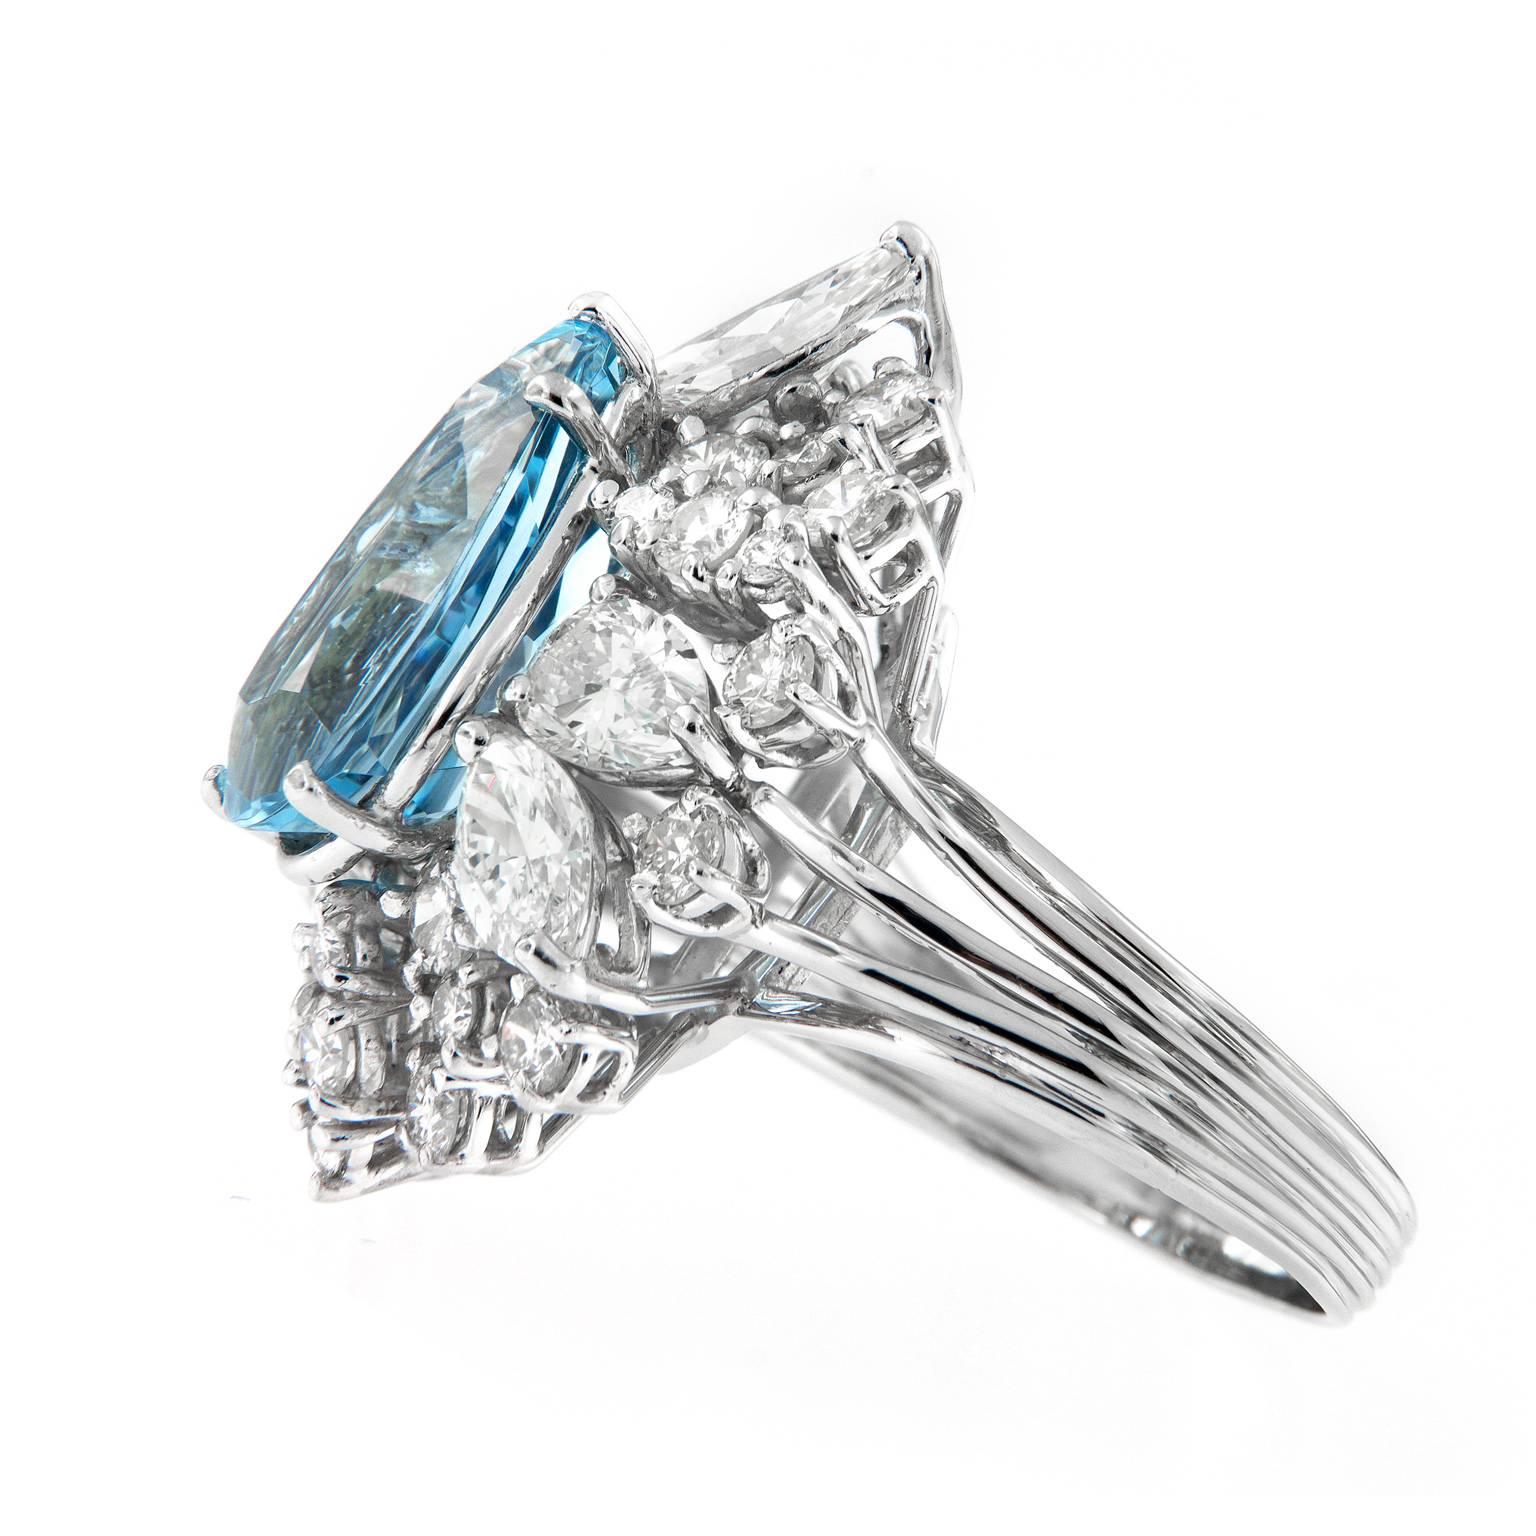 Be prepared for compliments with this exceptional cocktail Ring. Ring centers around a stunning 5.27 carat pear shaped aquamarine of intense sky blue color, the quintessential color of the finest aquamarine. Auqamarine is surrounded by a cluster of